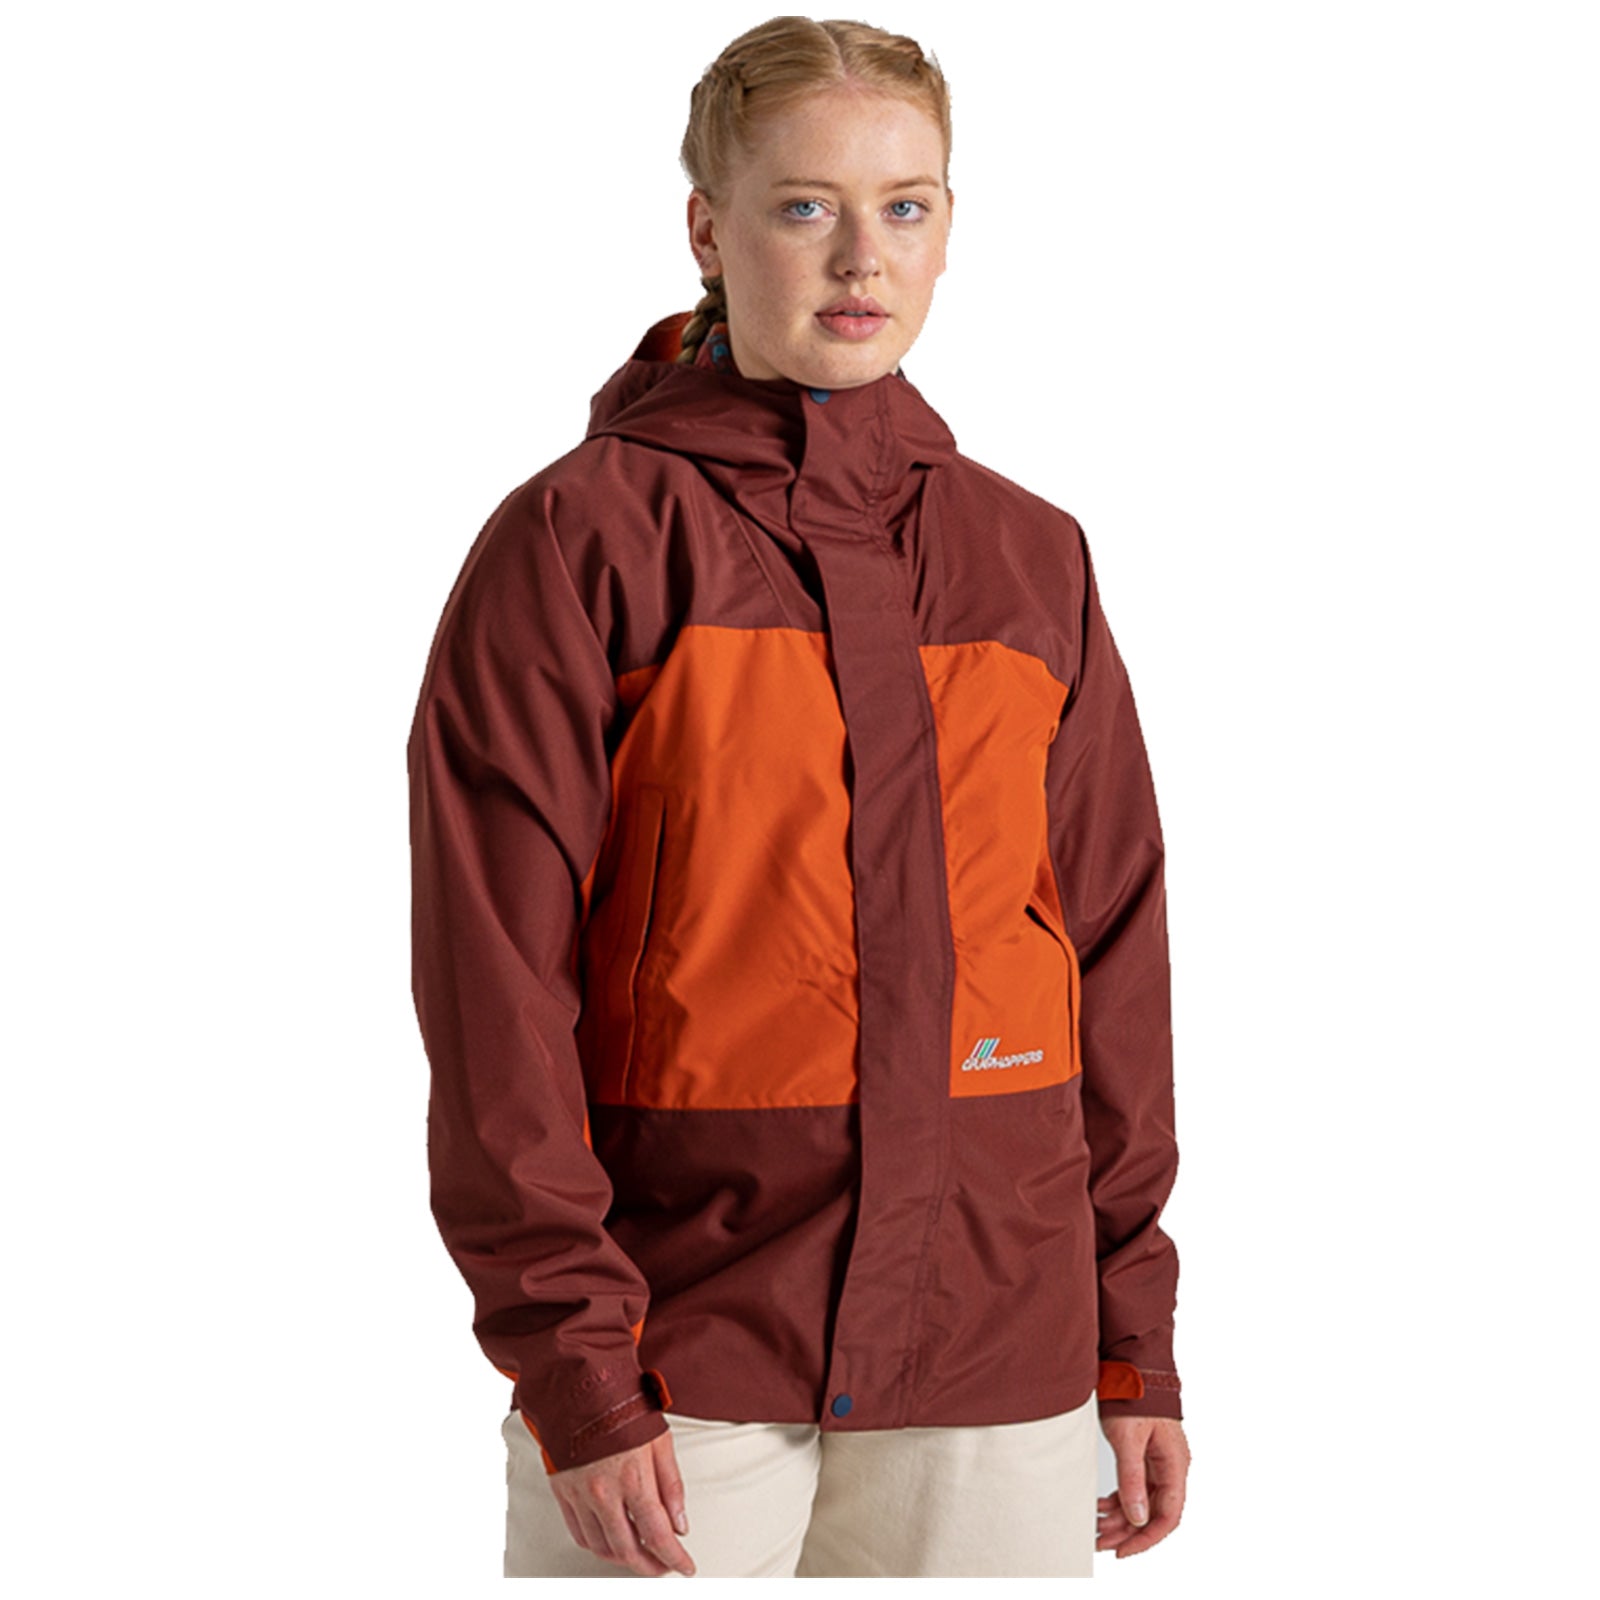 Craghoppers Unisex Dustin Insulated Waterproof Jacket